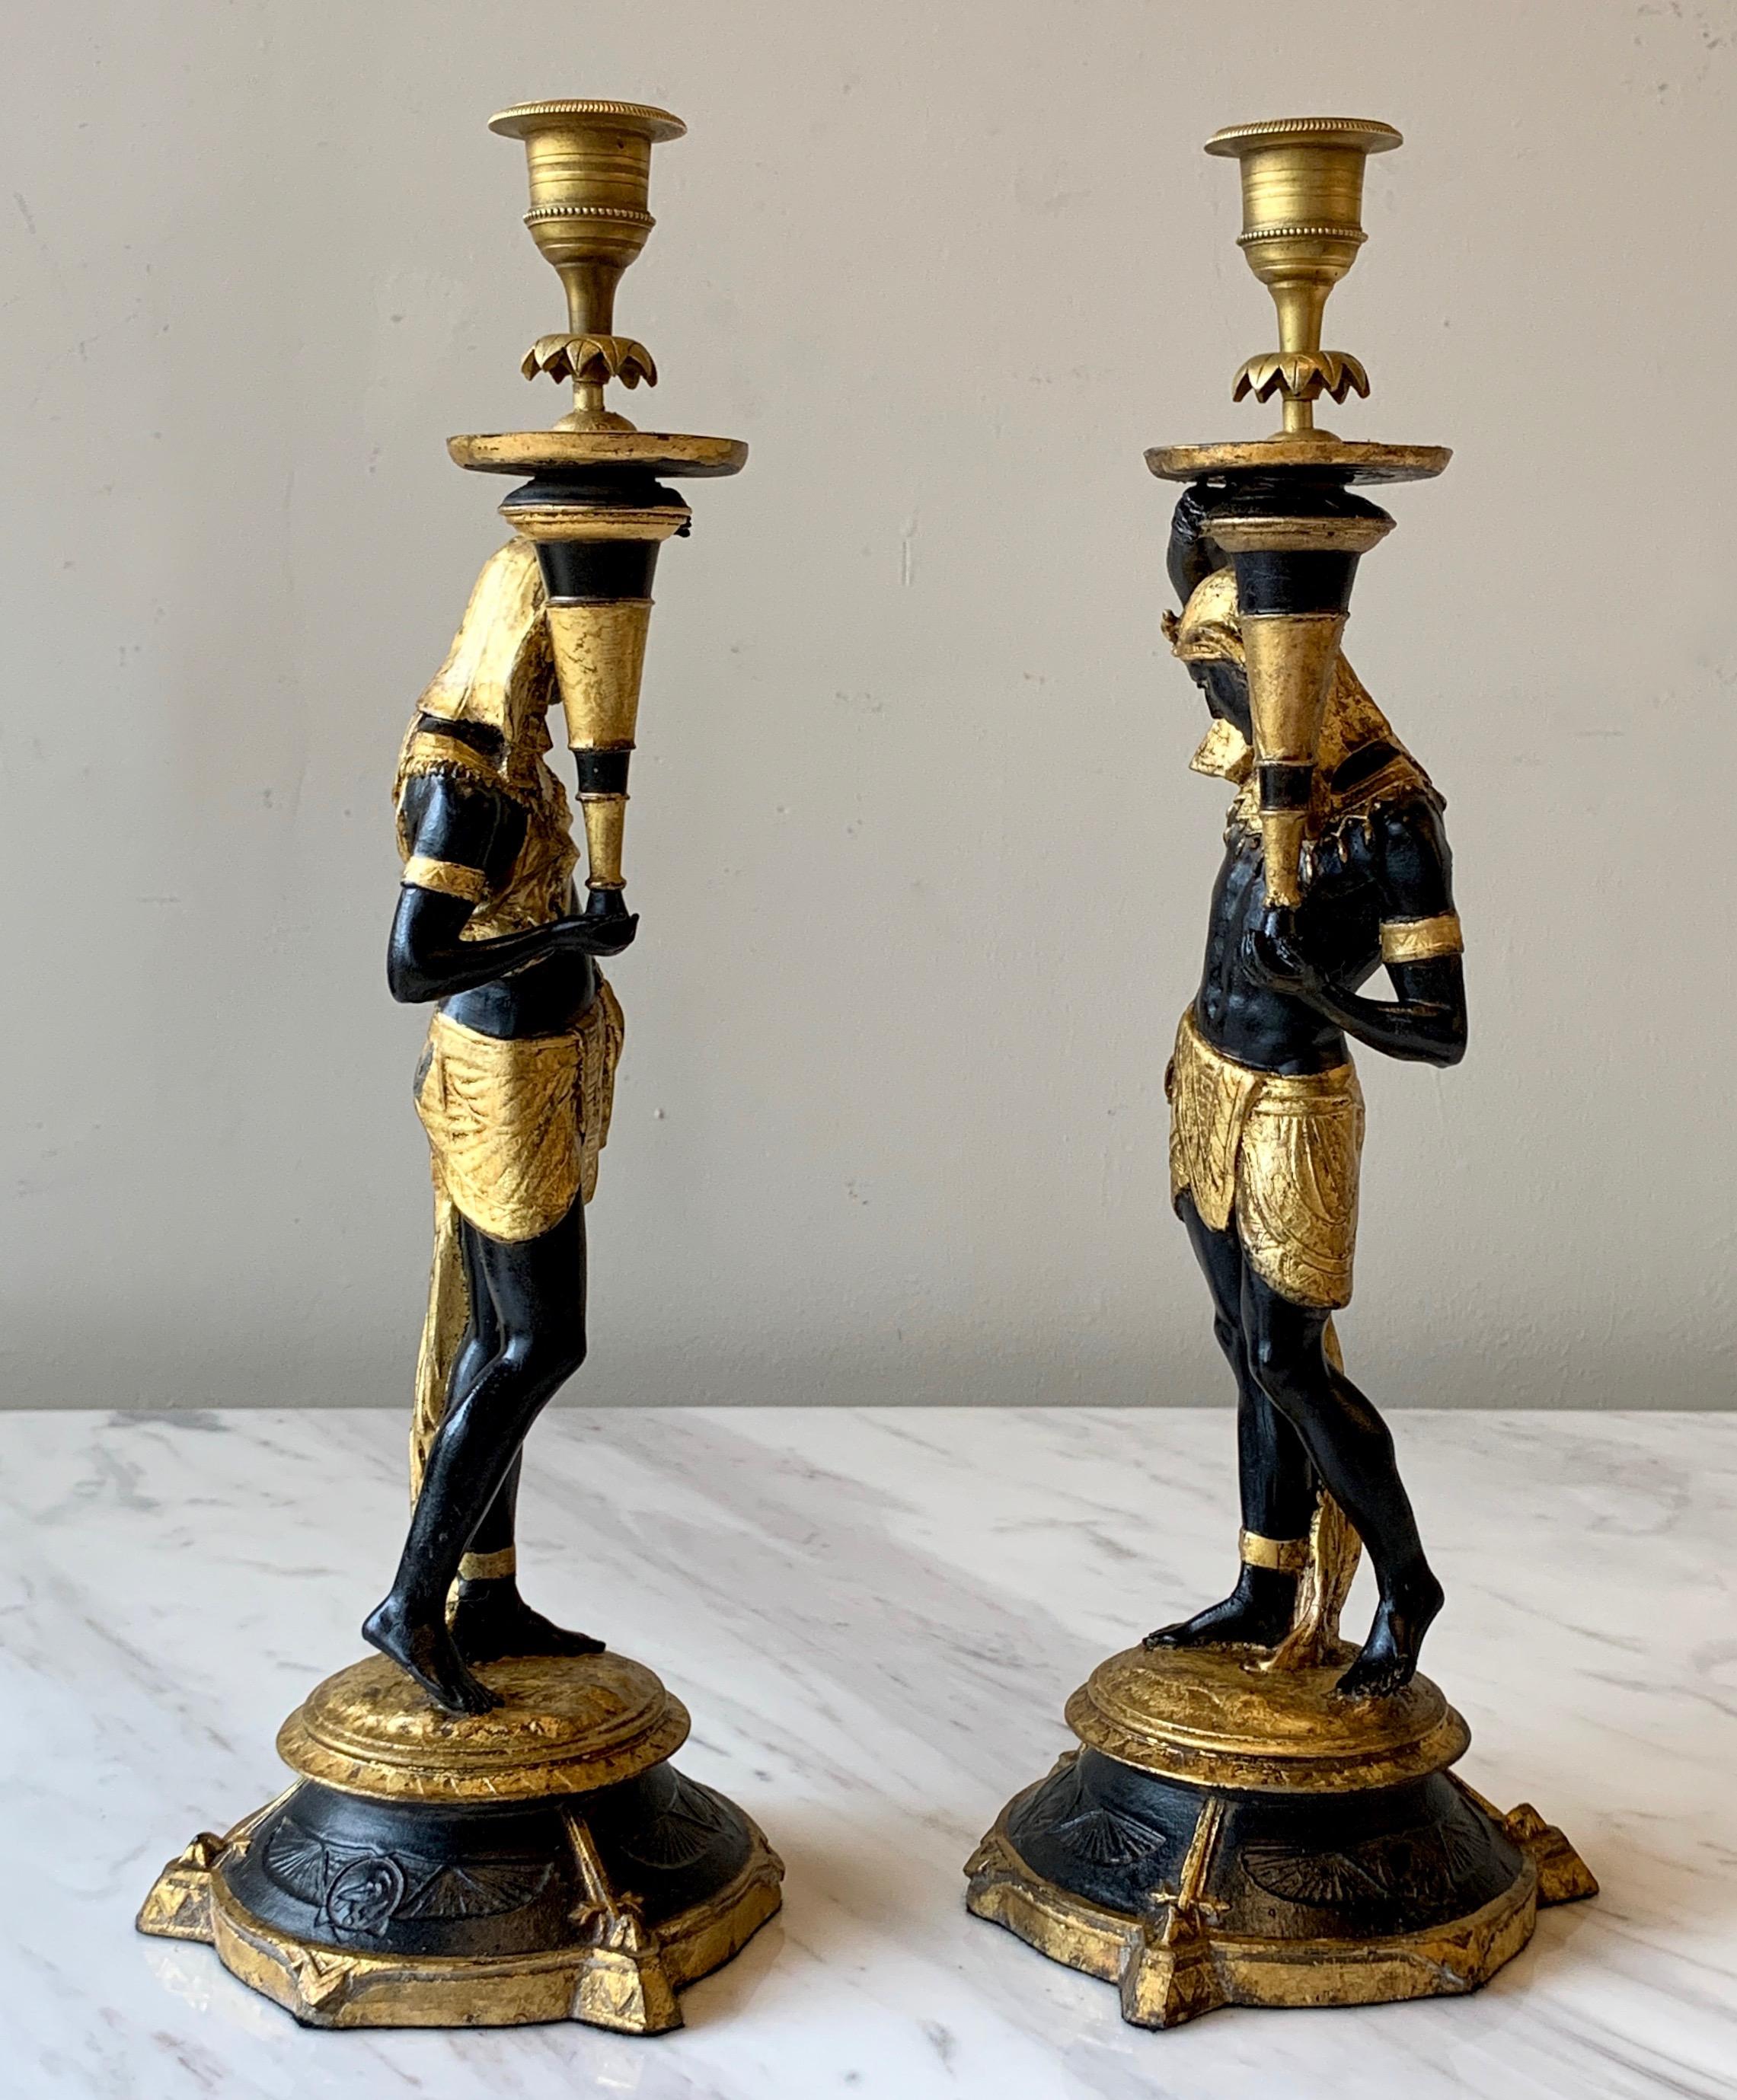 20th Century Pair of Egyptian Revival Candlesticks